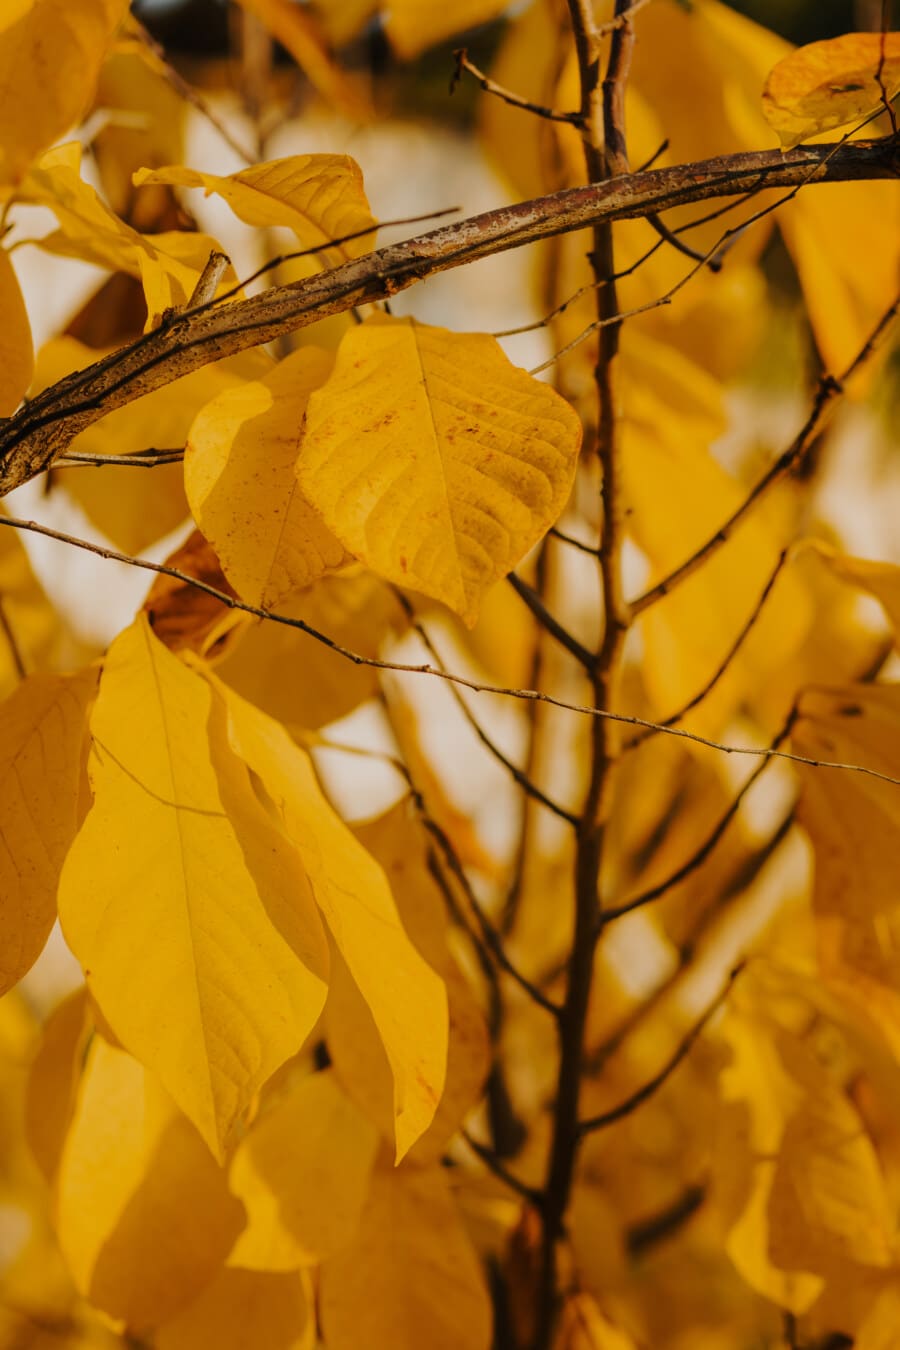 branches, october, autumn season, yellow leaves, yellowish brown, leaves, autumn, yellow, tree, plant